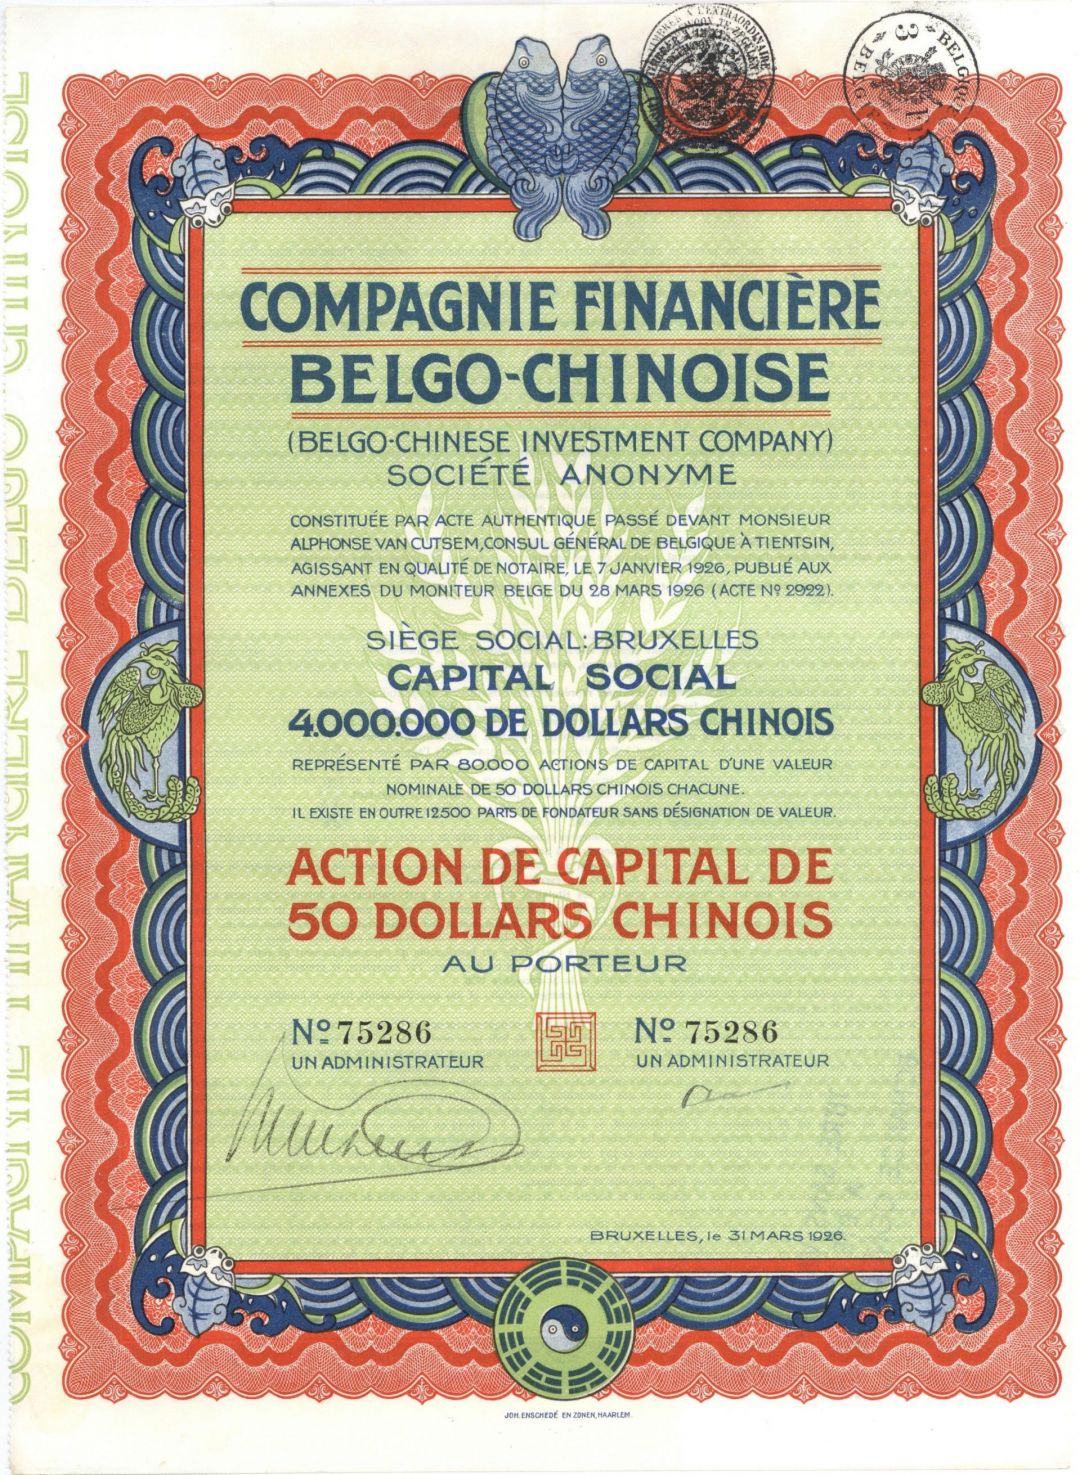 Compagnie Financiere Belgo-Chinoise - Belgium & China Stock Certificate or Action